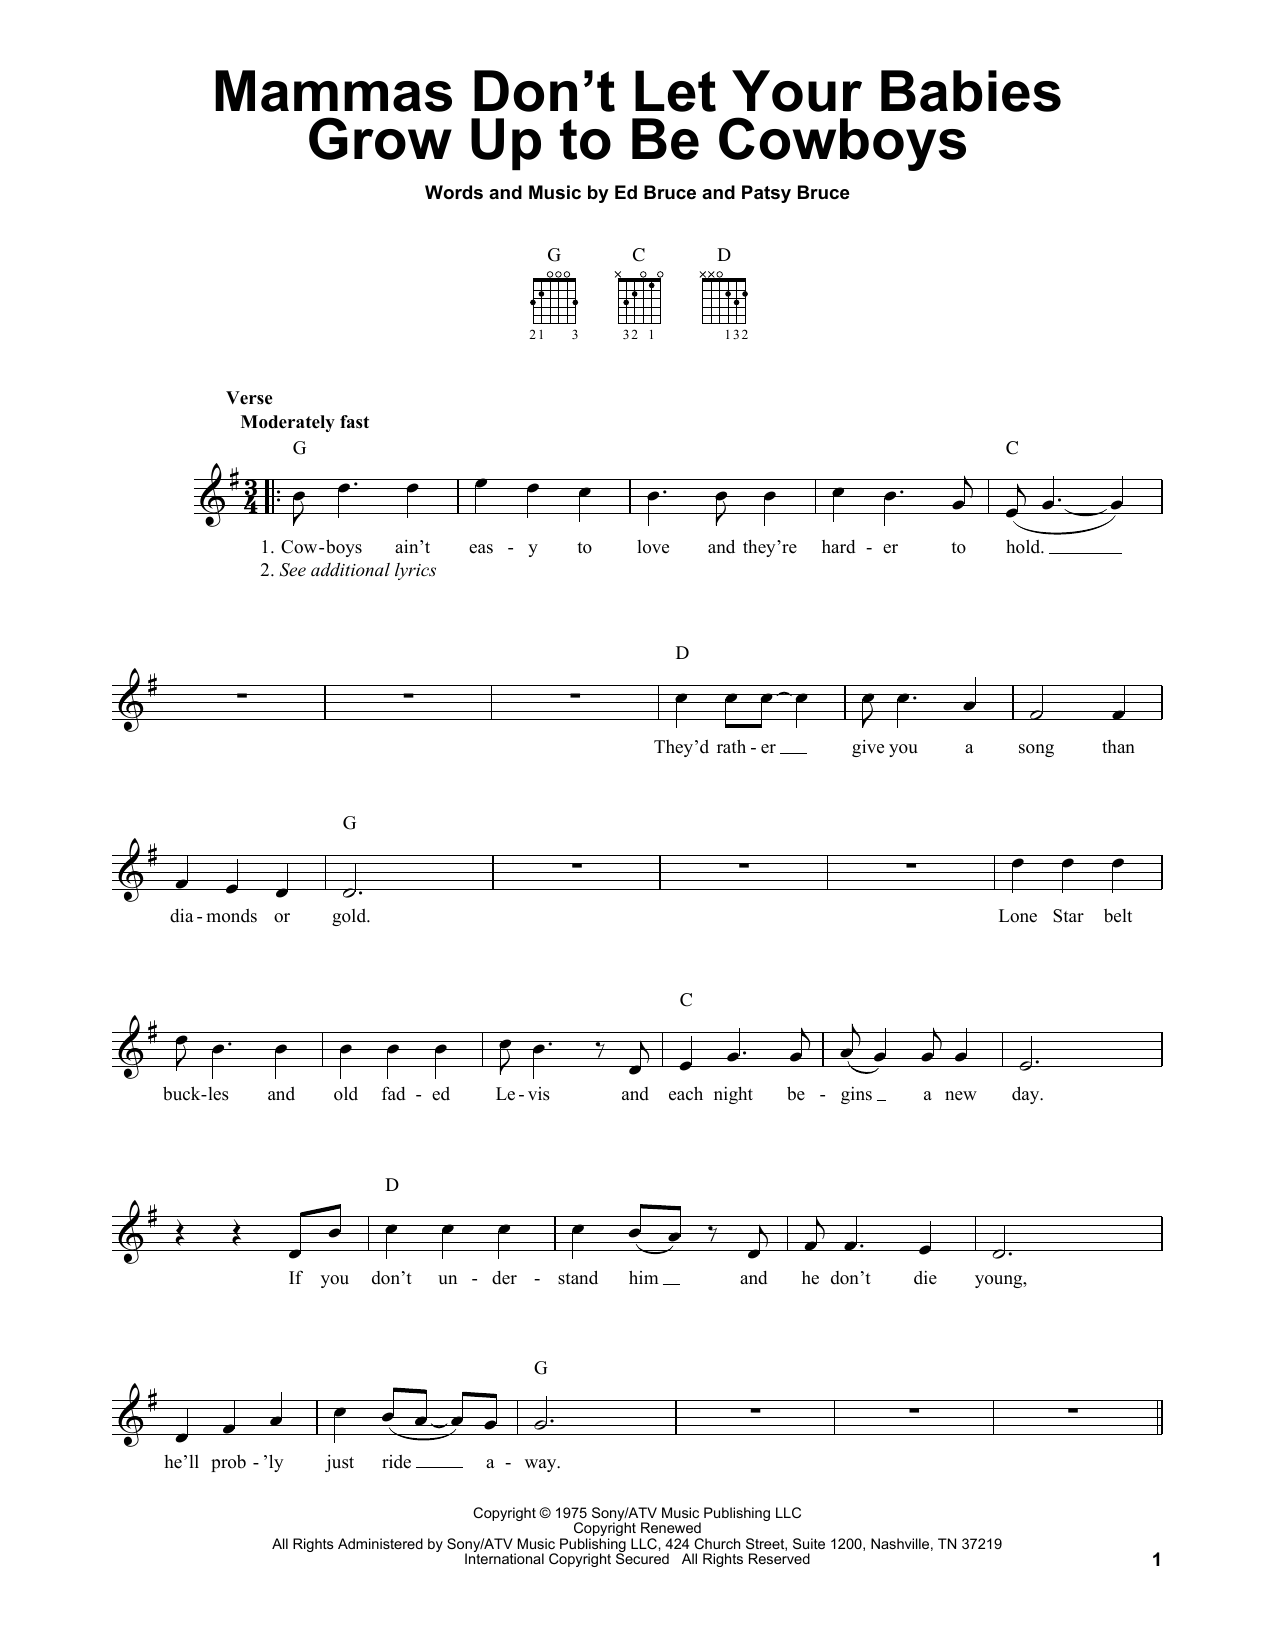 Download Waylon Jennings & Willie Nelson Mammas Don't Let Your Babies Grow Up To Sheet Music